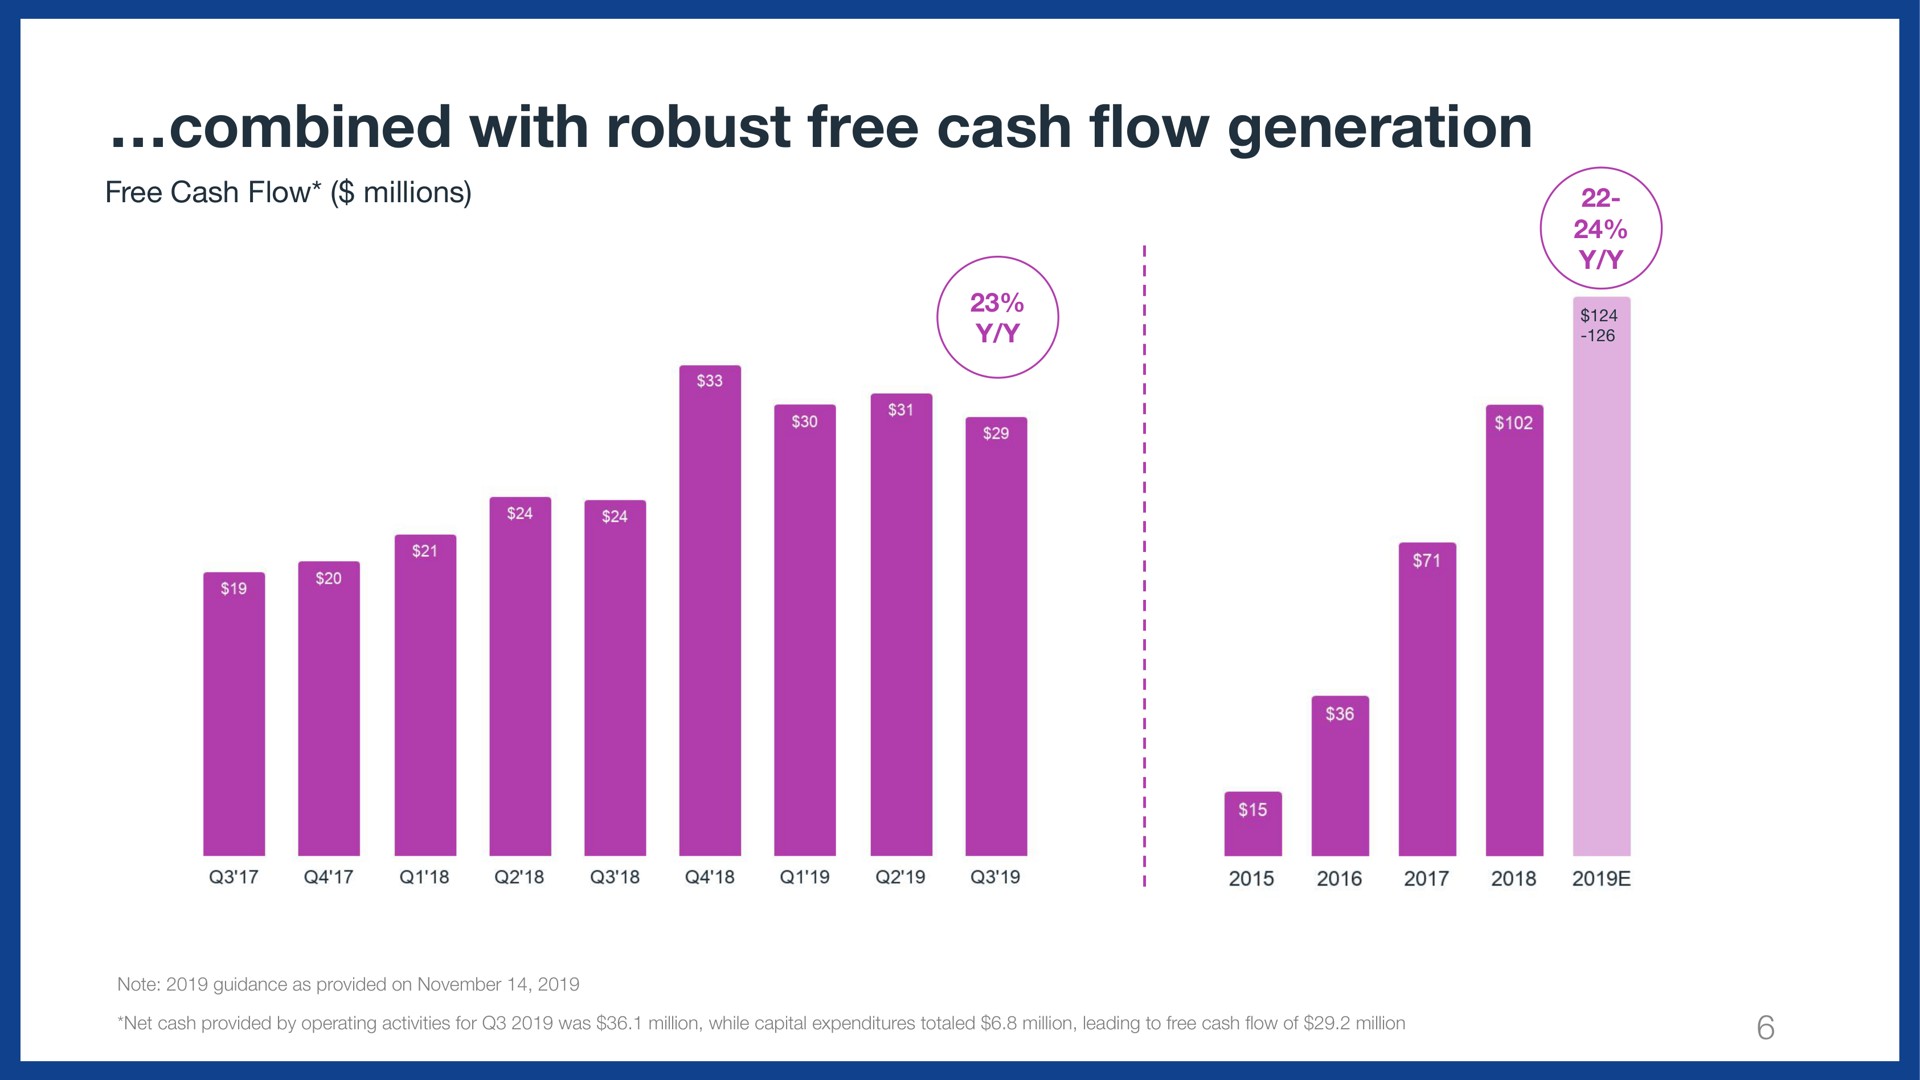 combined with robust free cash generation combined flow | Wix